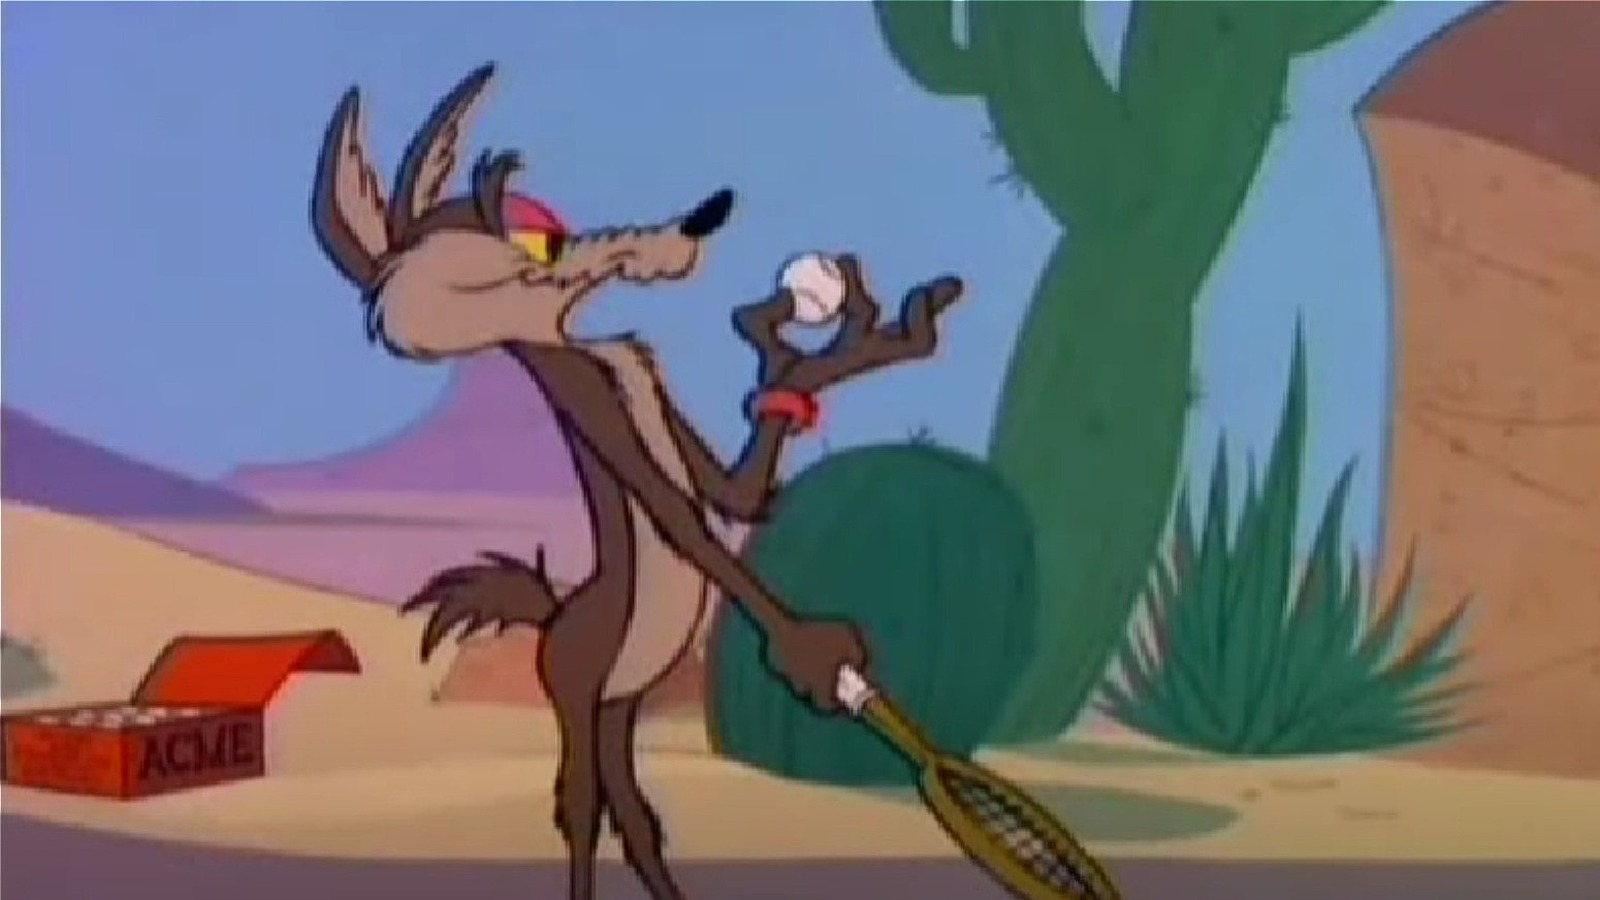 The Inspiration Behind Looney Tunes' Acme Corporation